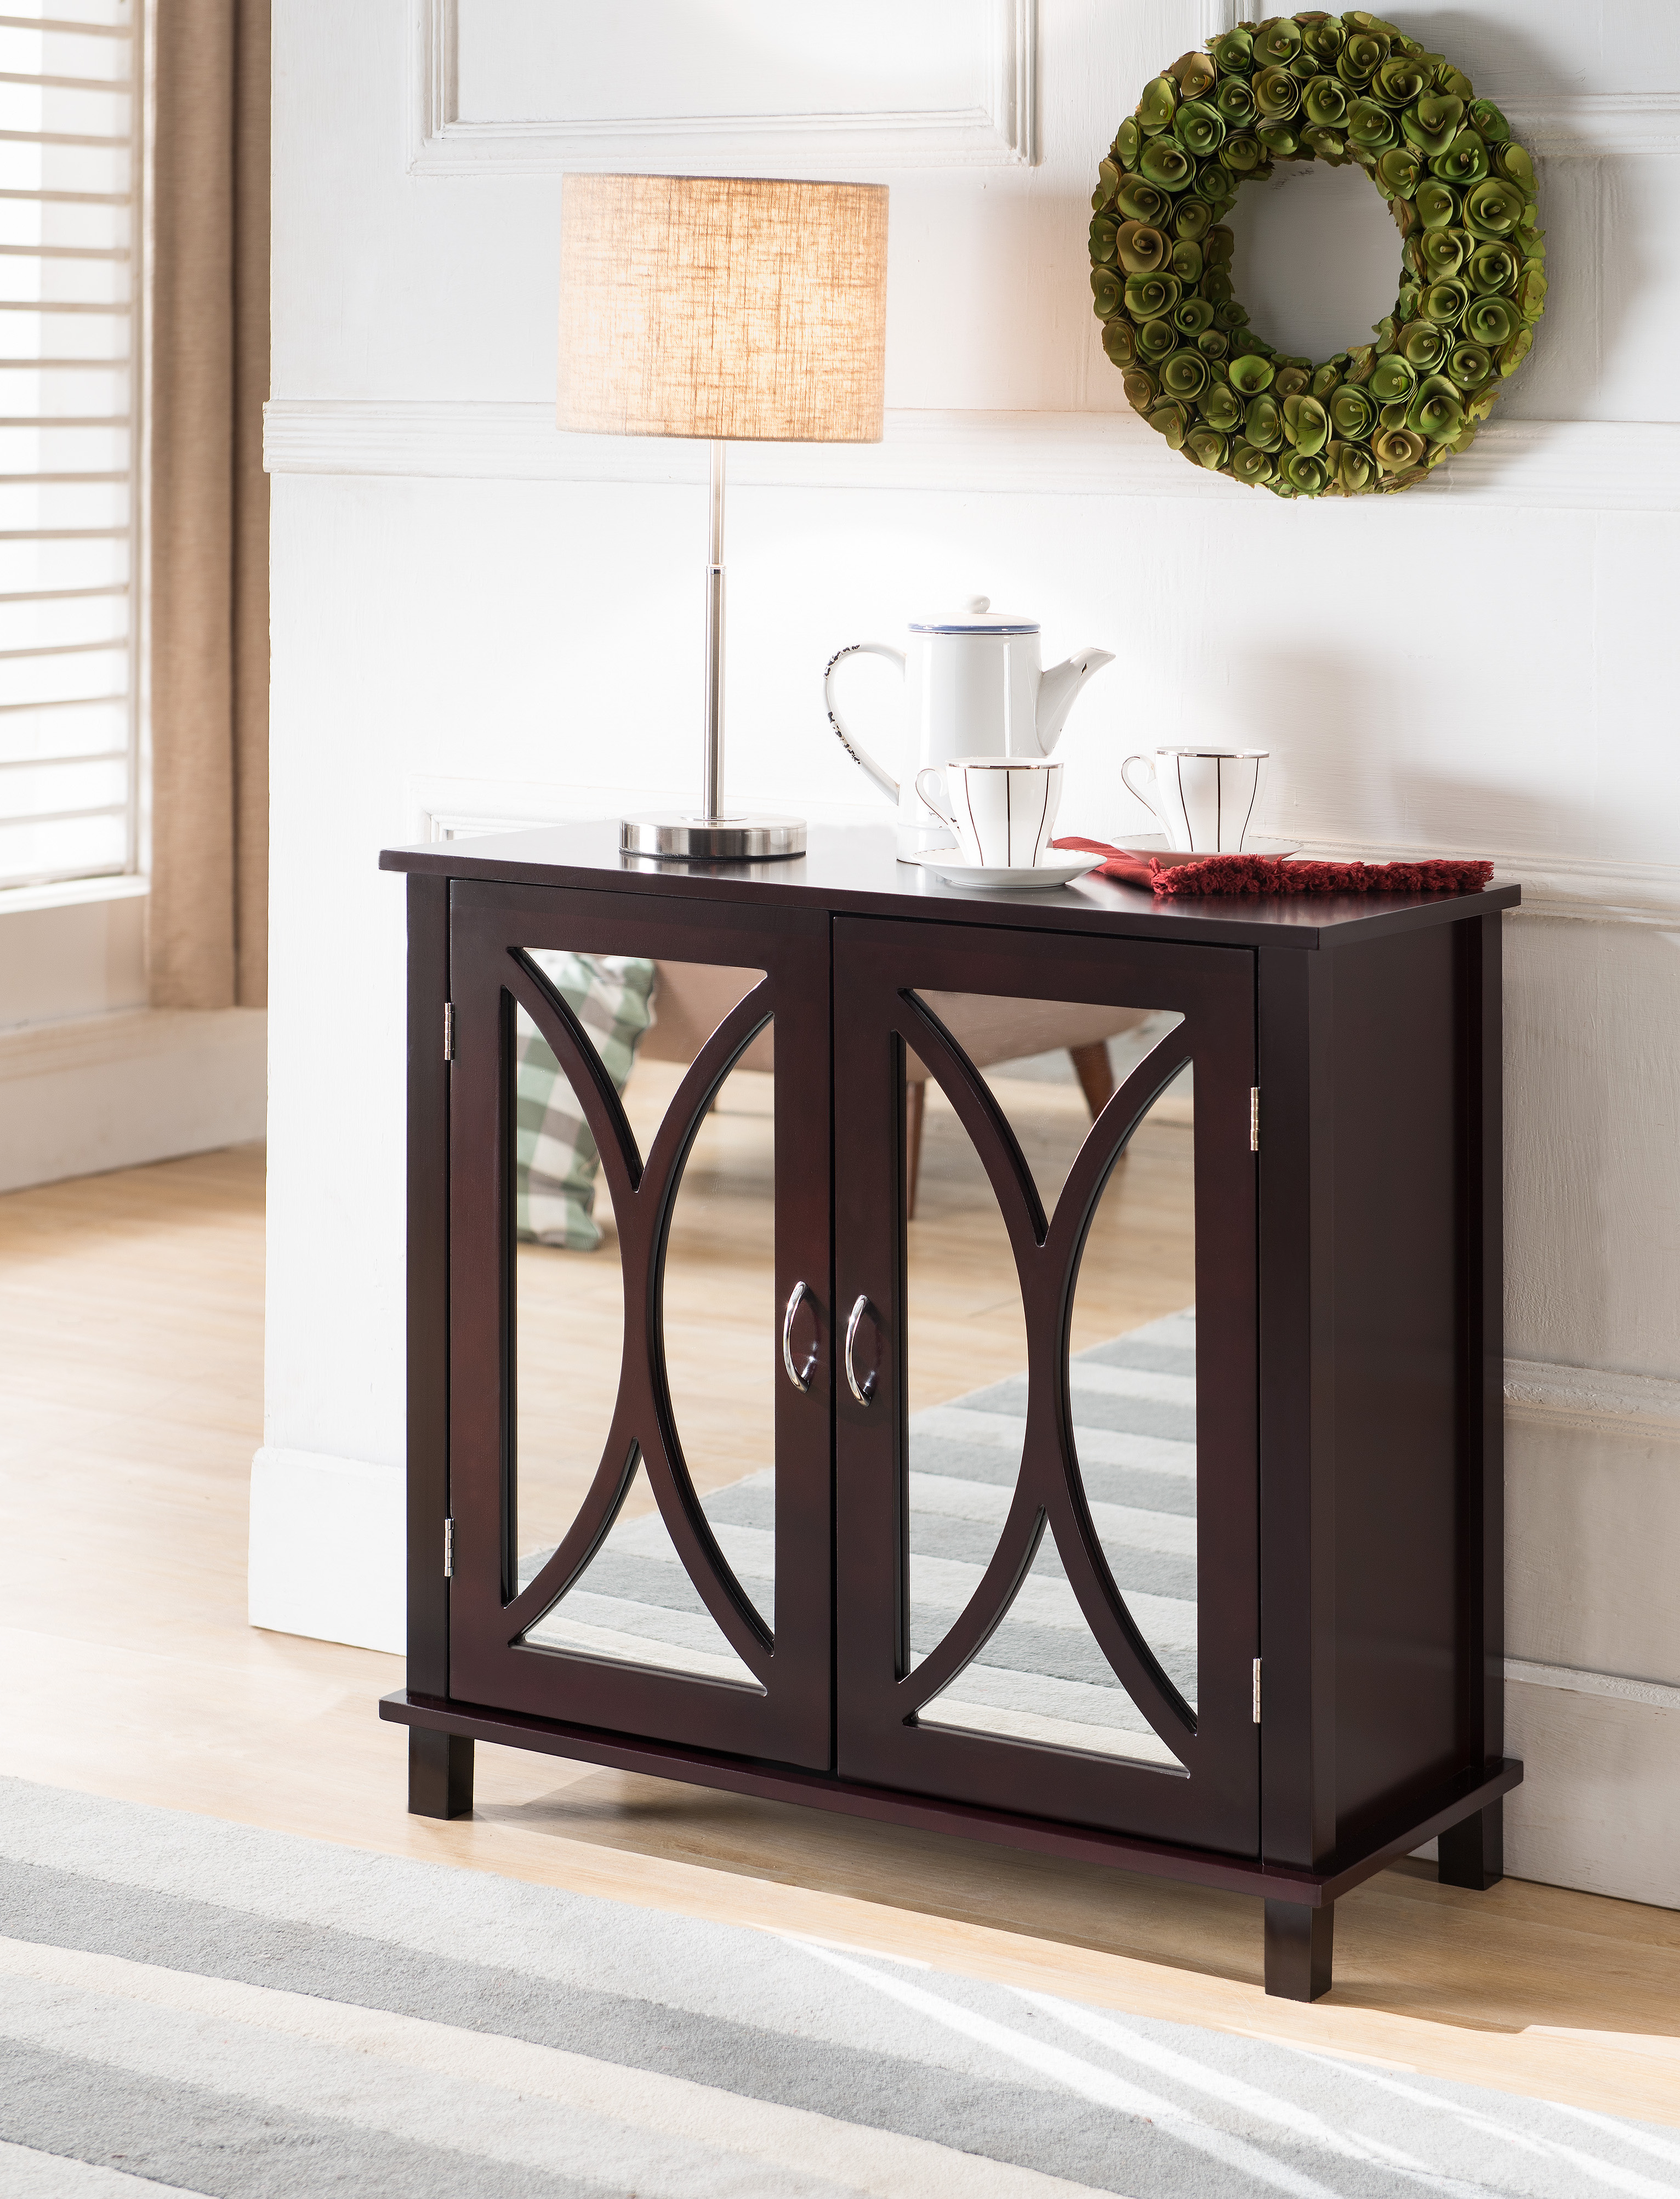 luke espresso wood contemporary accent entryway display console table with doors mirrored cabinet door storage small modern glass coffee round dining cloth dale lamps narrow entry